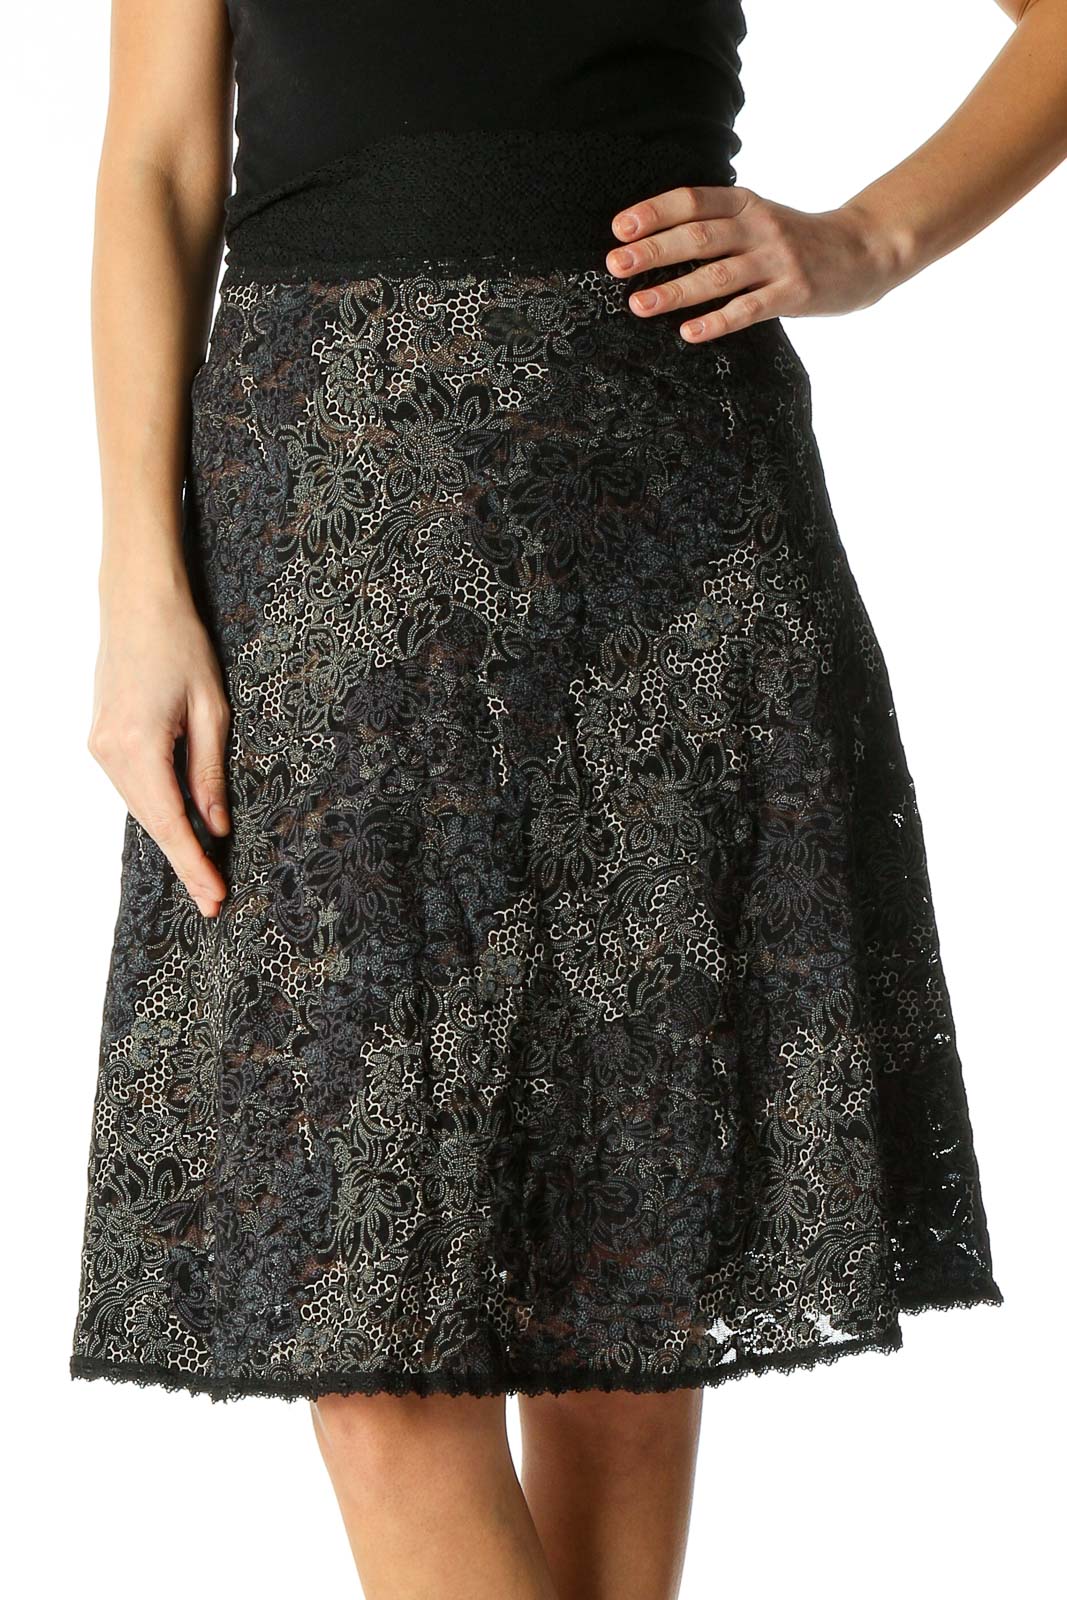 Black Animal Print Party A-Line Skirt Front